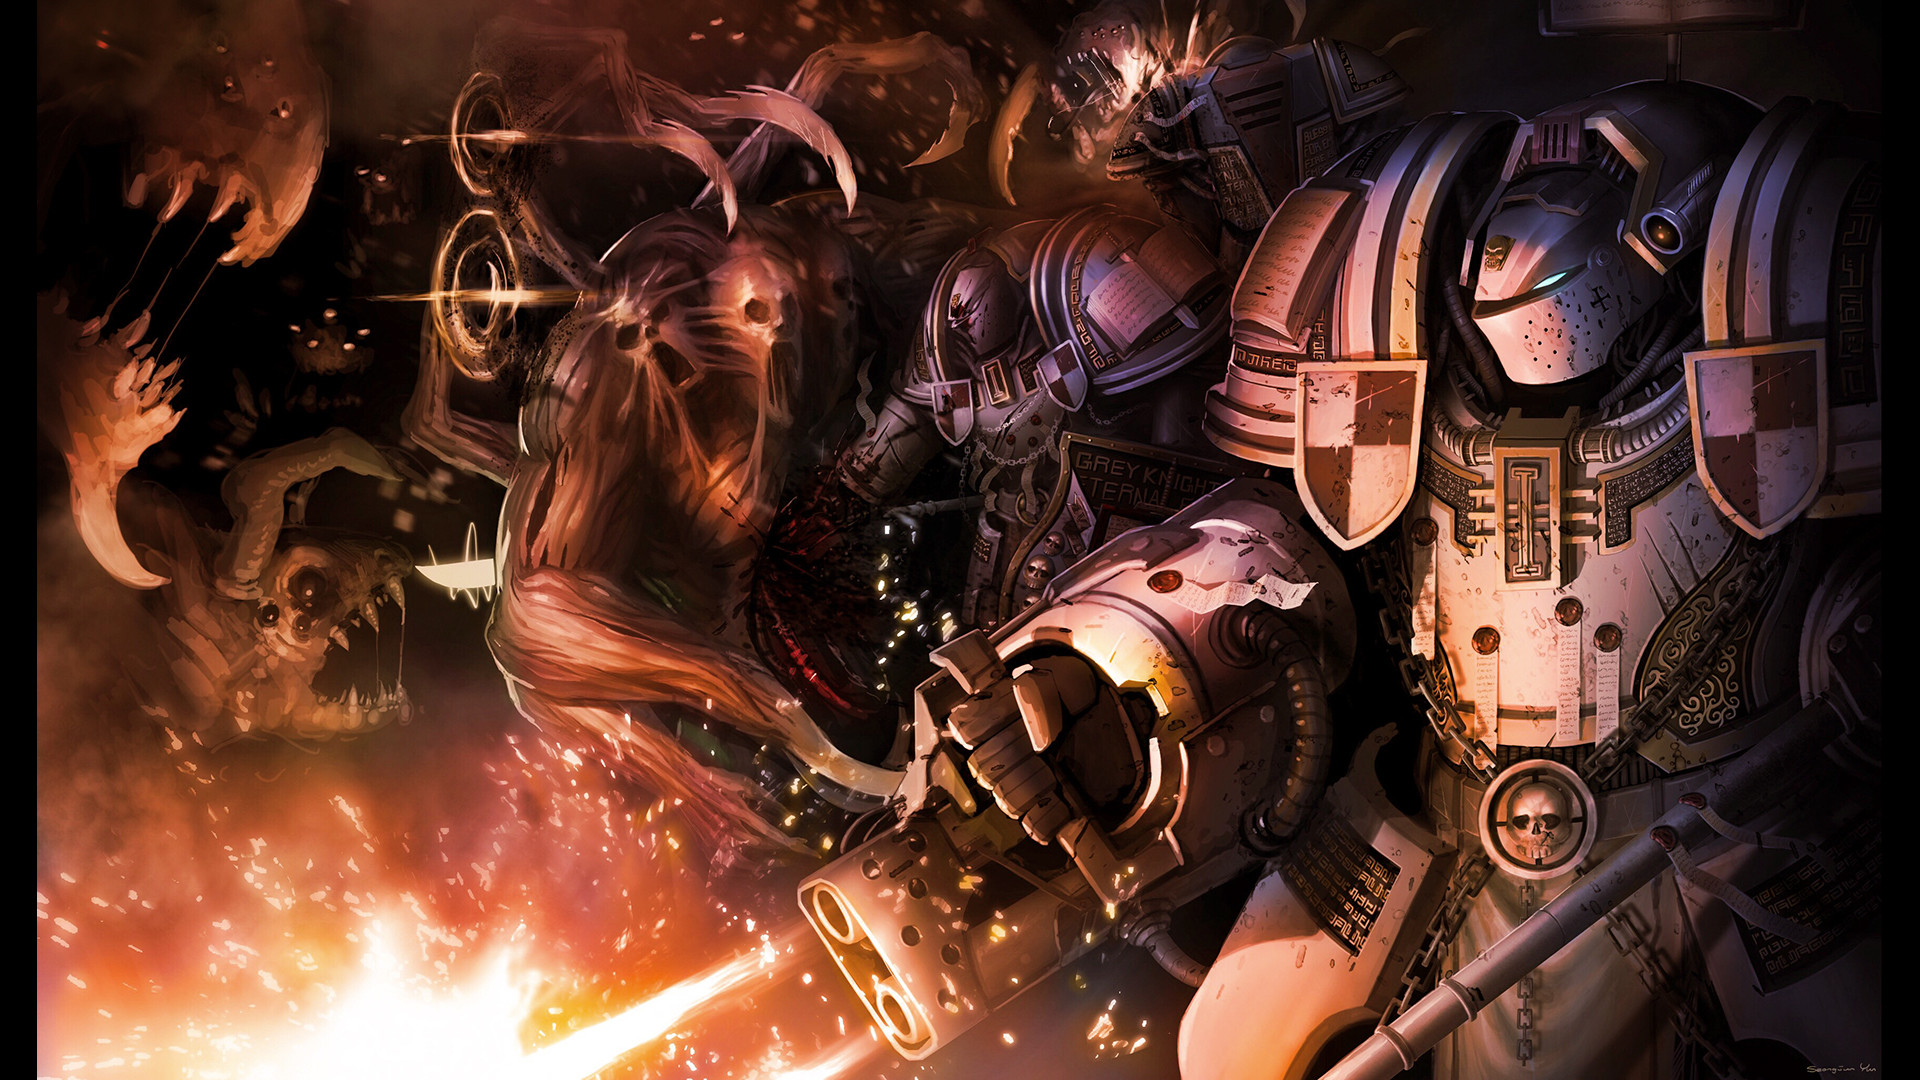 grey knights wallpaper,action adventure game,fictional character,cg artwork,strategy video game,pc game